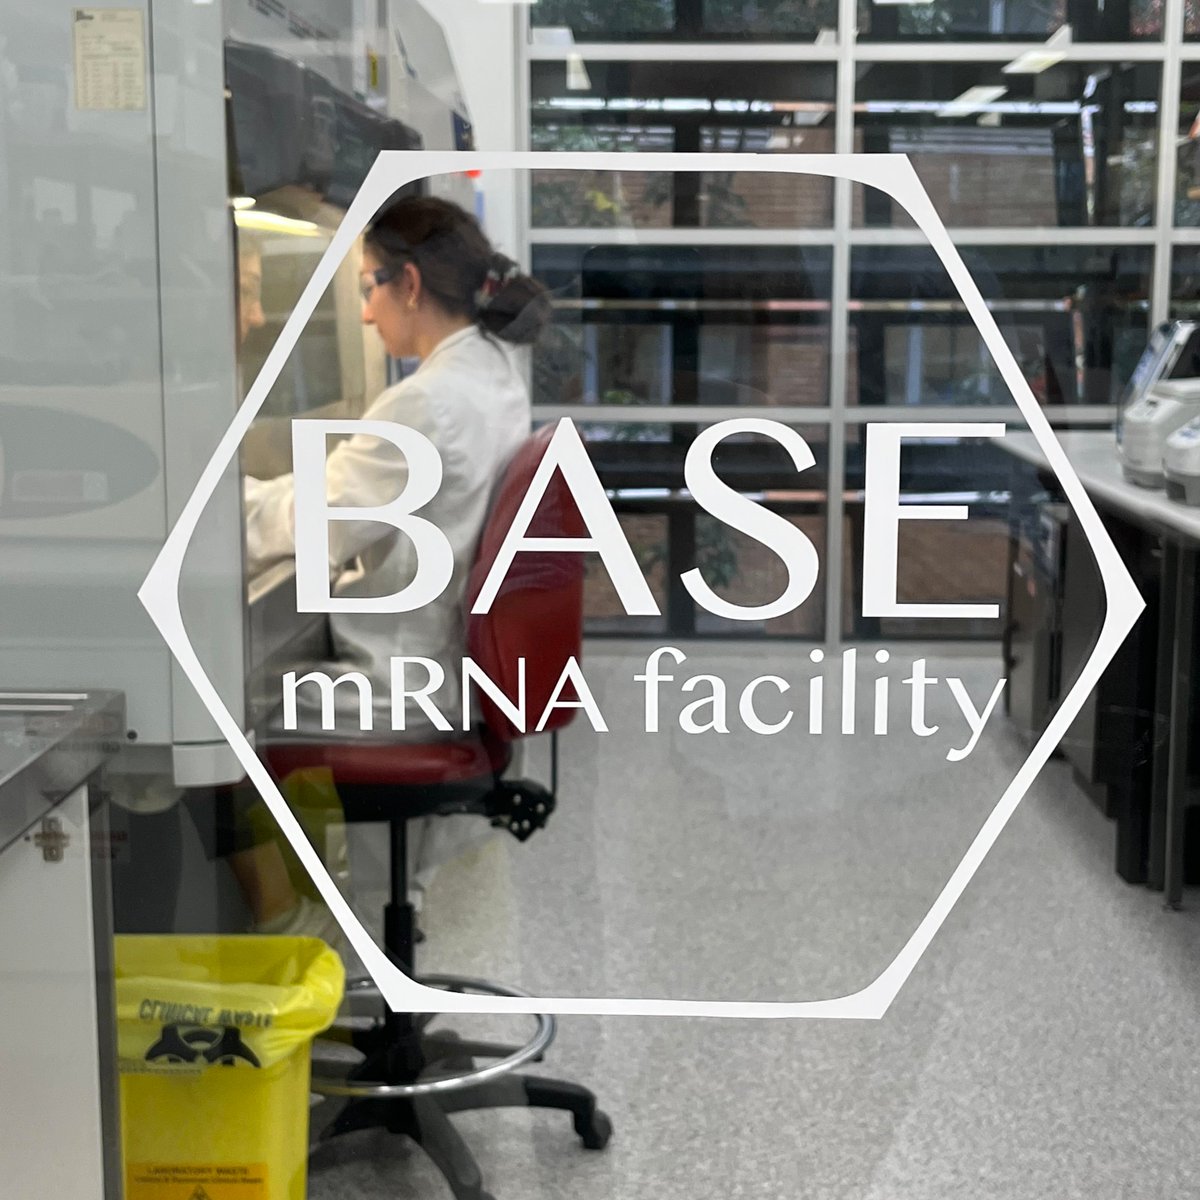 🚨We are recruiting for an #mRNA Clinical Manufacture Team Leader. The high level position will build a highly-performing clinical manufacture team at a state-of-the-art facility. Please share! 🚨
@AIBNatUQ @TIA_Aust @NationalBiolog2 @UQ_News 

uq.wd3.myworkdayjobs.com/uqcareers/job/…